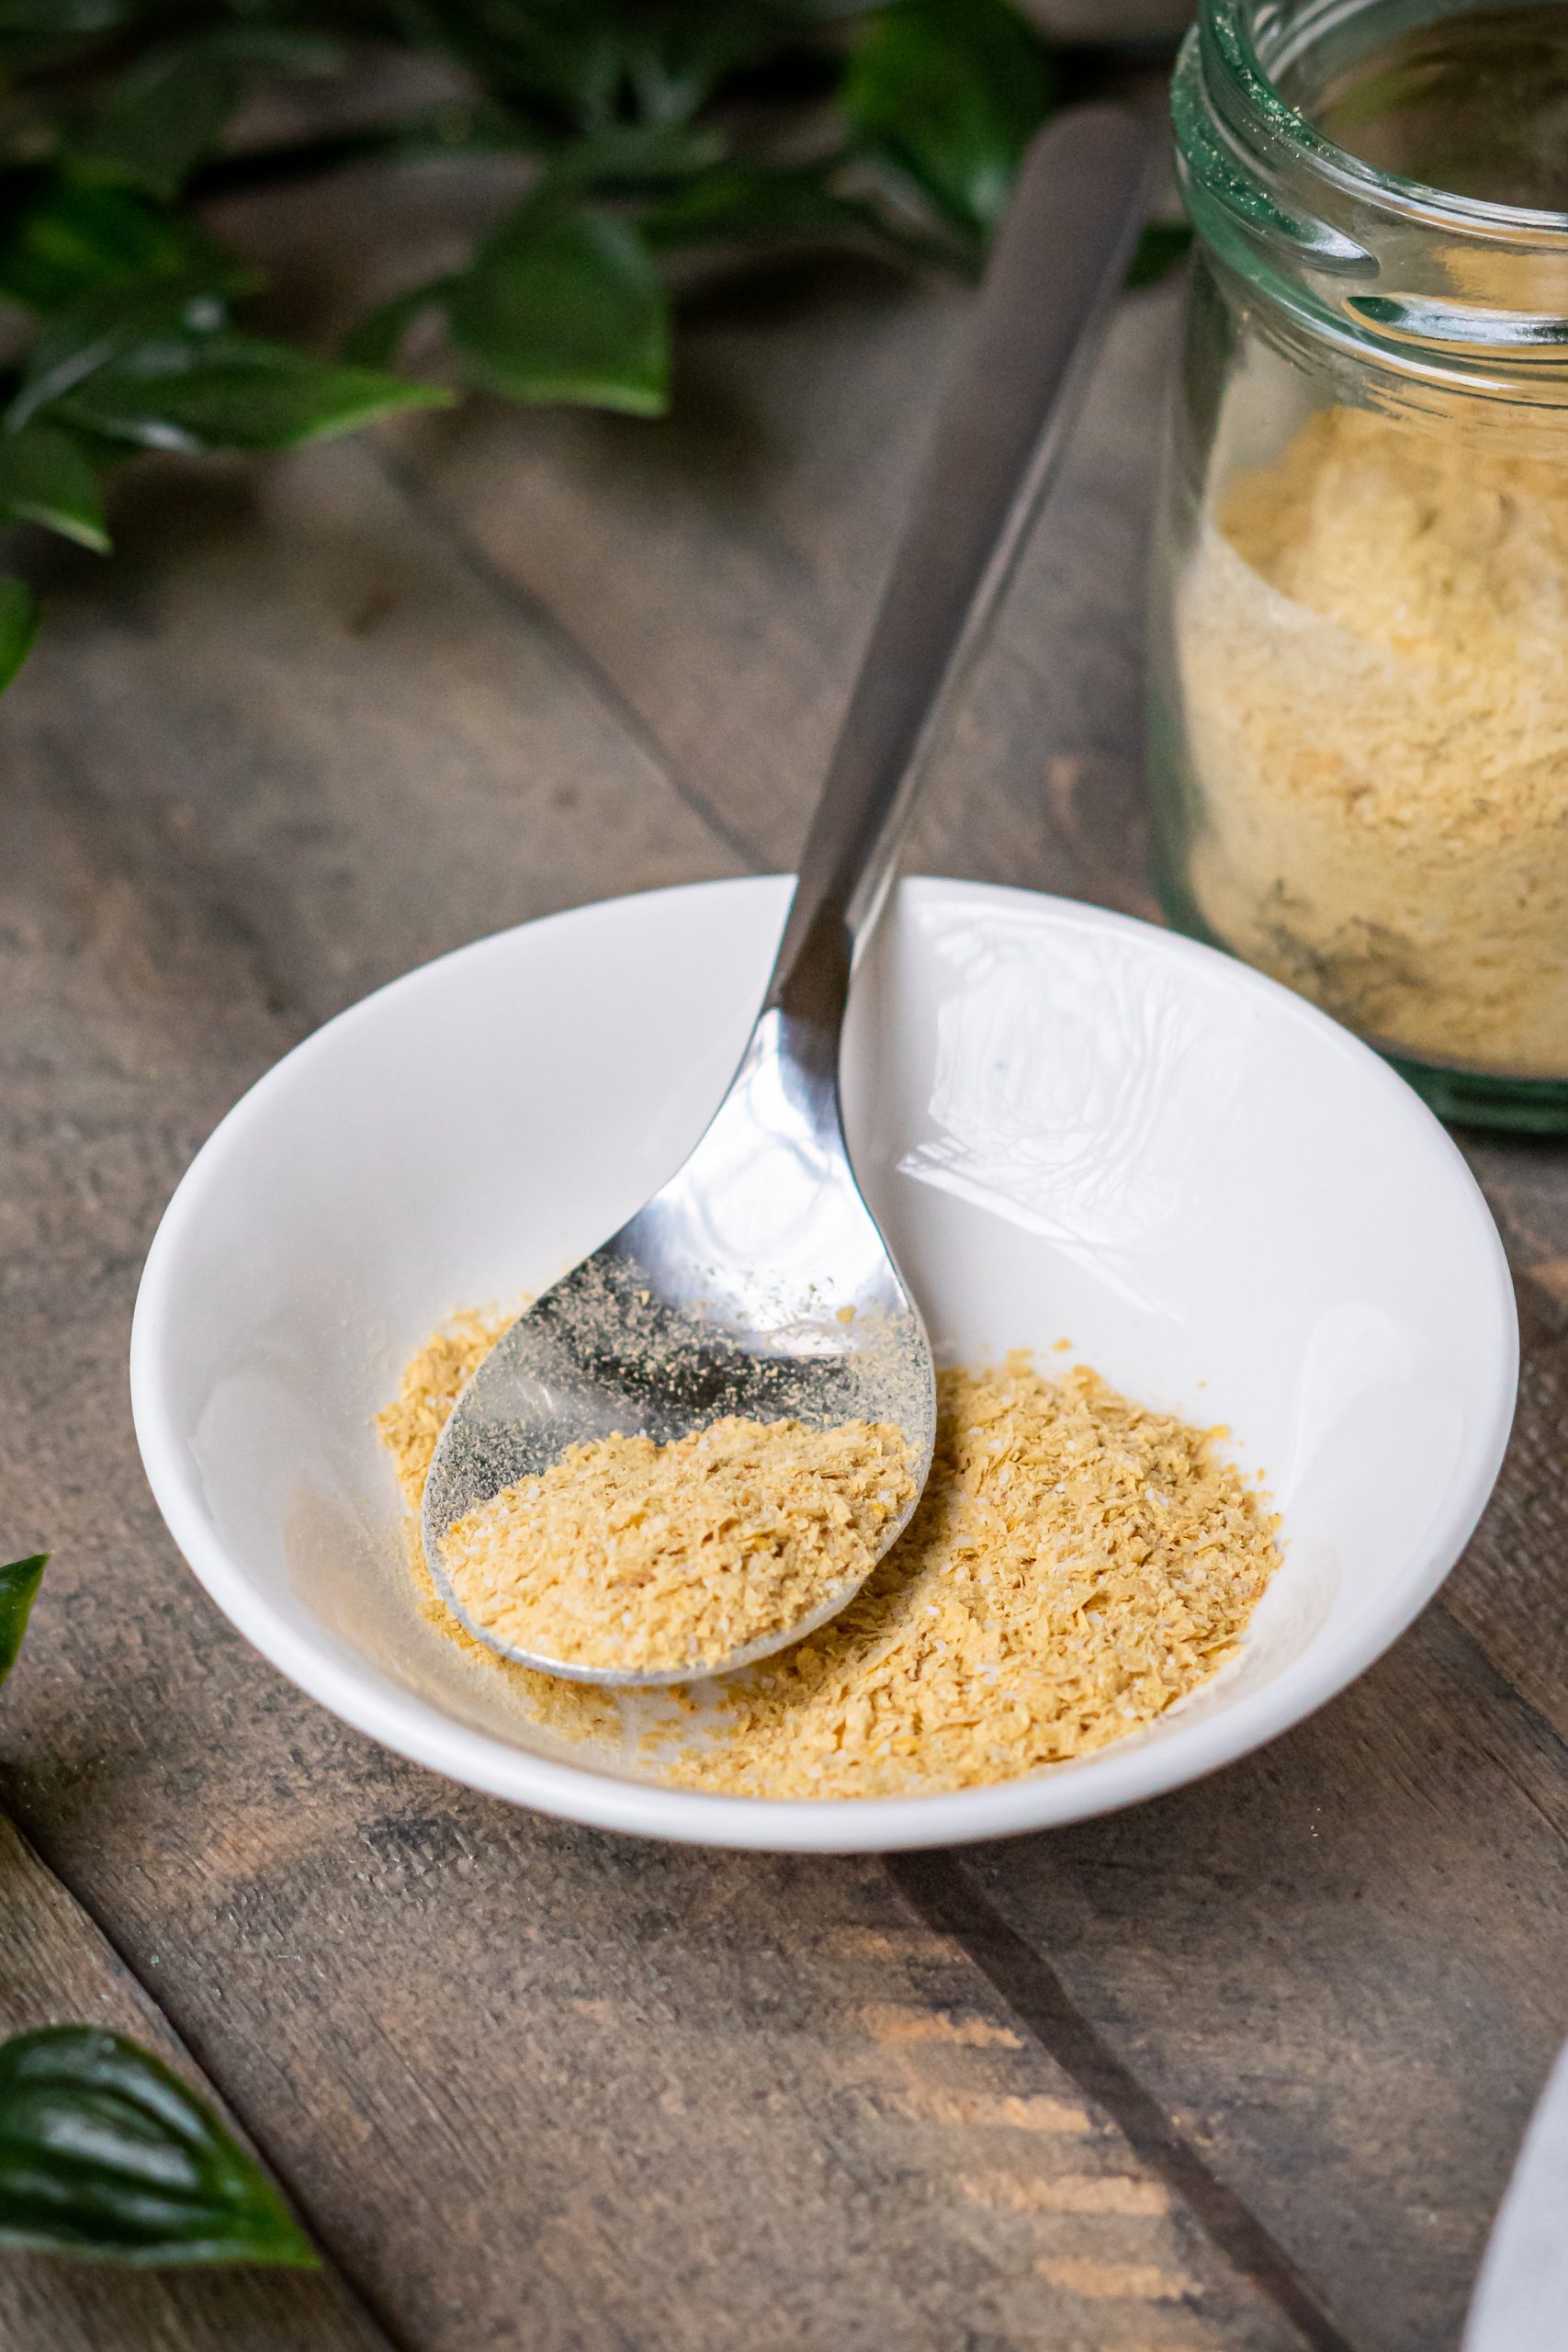 vegan parmesan cheese in a dish with a spoon